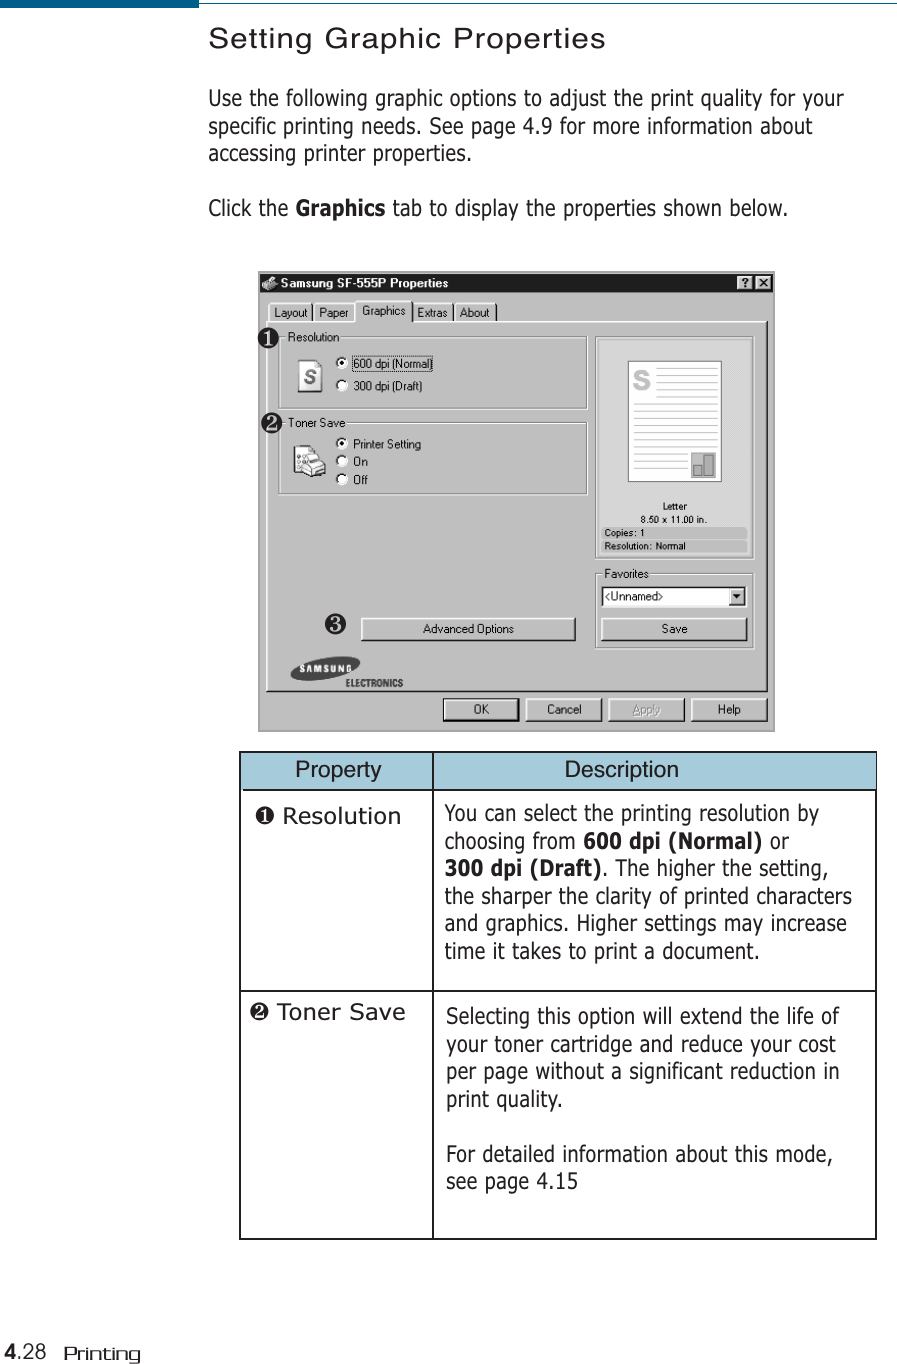 4.28 PrintingSetting Graphic PropertiesUse the following graphic options to adjust the print quality for yourspecific printing needs. See page 4.9 for more information aboutaccessing printer properties.Click the Graphics tab to display the properties shown below.Property Description❶ Resolution❷ Toner SaveYou can select the printing resolution bychoosing from 600 dpi (Normal) or 300 dpi (Draft). The higher the setting,the sharper the clarity of printed charactersand graphics. Higher settings may increasetime it takes to print a document.Selecting this option will extend the life ofyour toner cartridge and reduce your costper page without a significant reduction inprint quality. For detailed information about this mode,see page 4.15❶❷❸